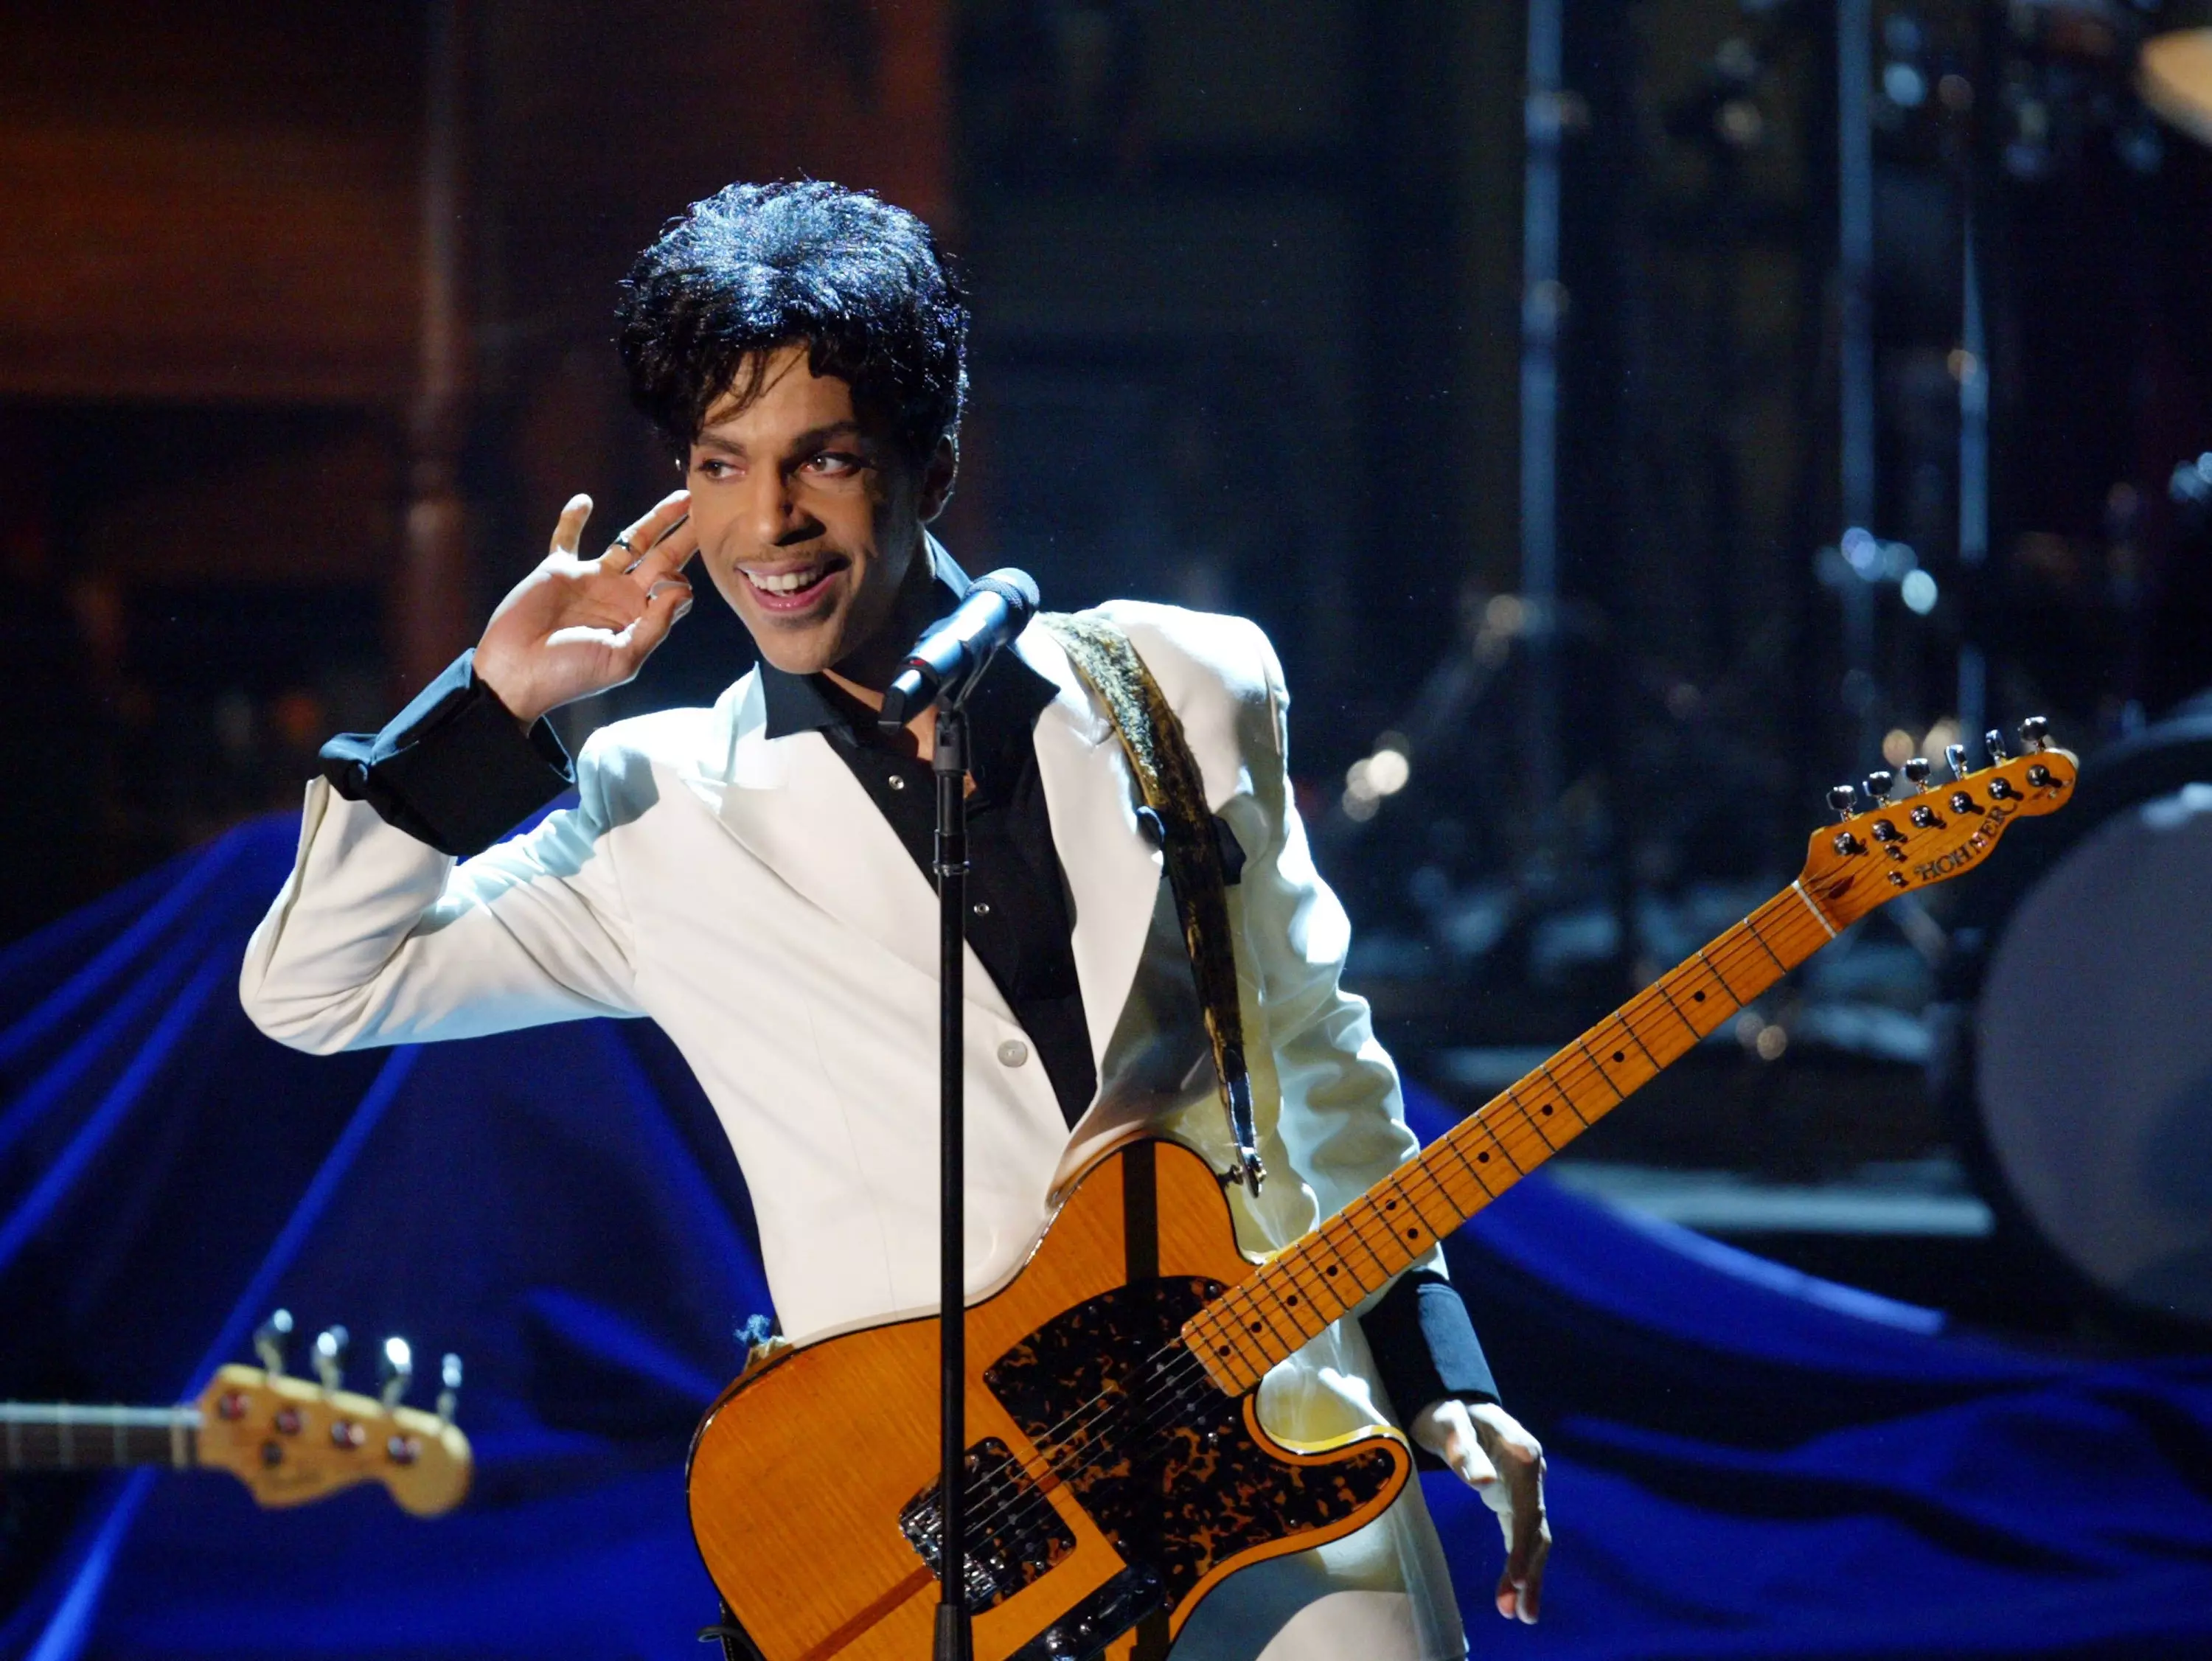 7 Legendary Prince Performances You Can Watch Online In Honor Of 'Purple Rain'